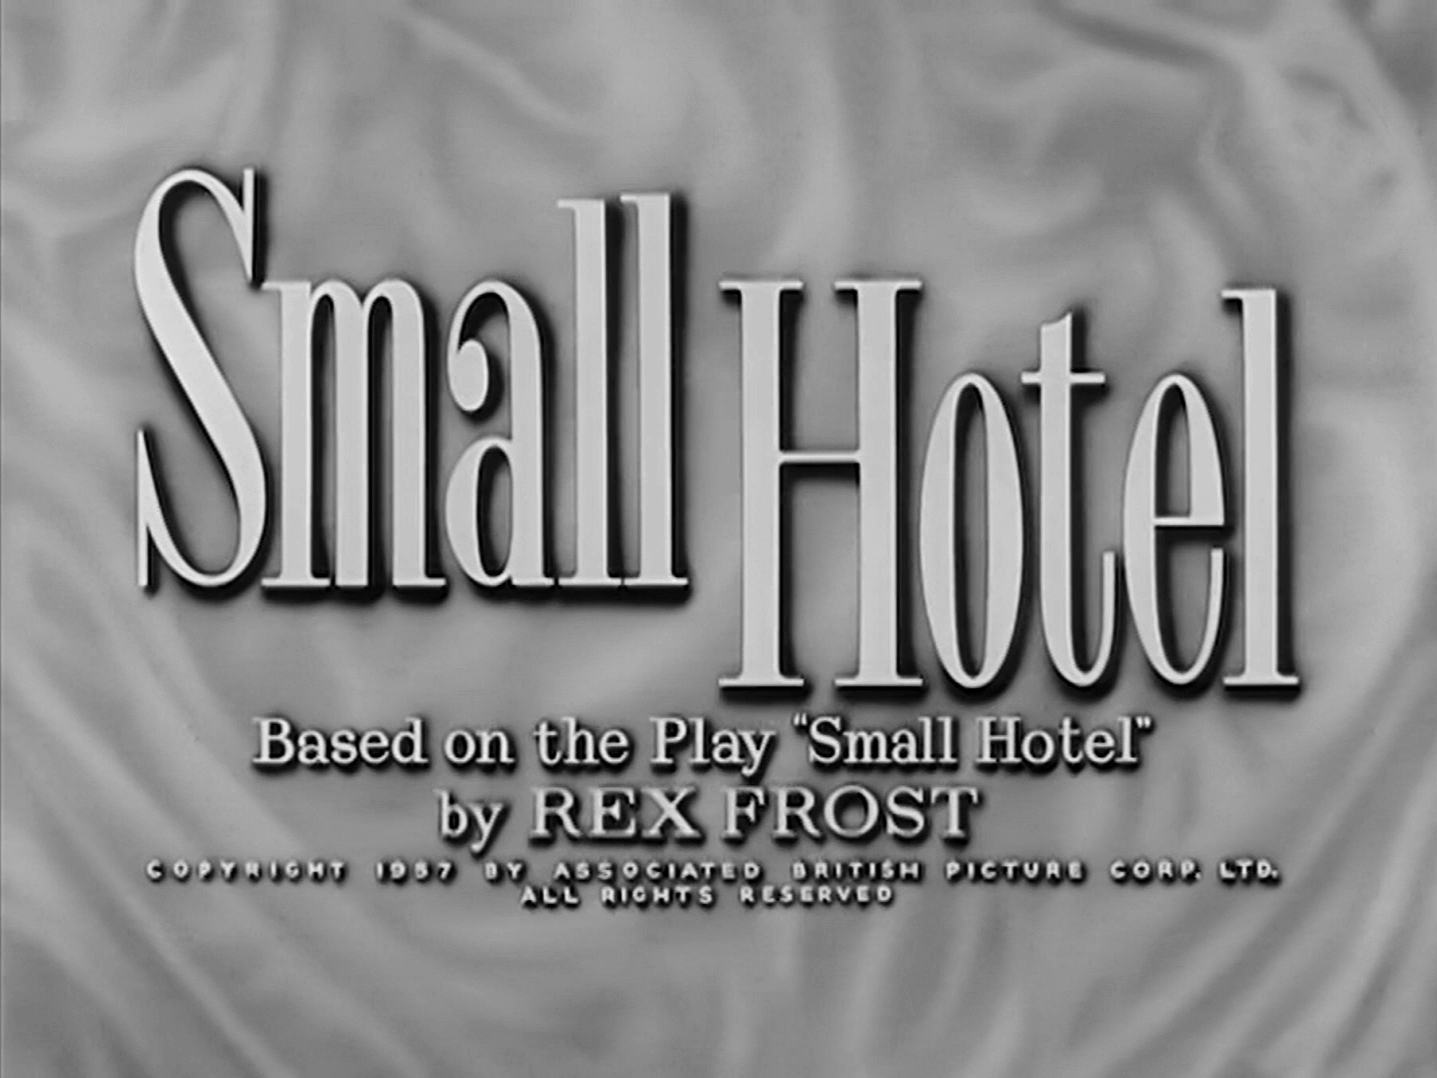 Main title from Small Hotel (1957) (3). Based on the play ‘Small Hotel’ by Rex Frost